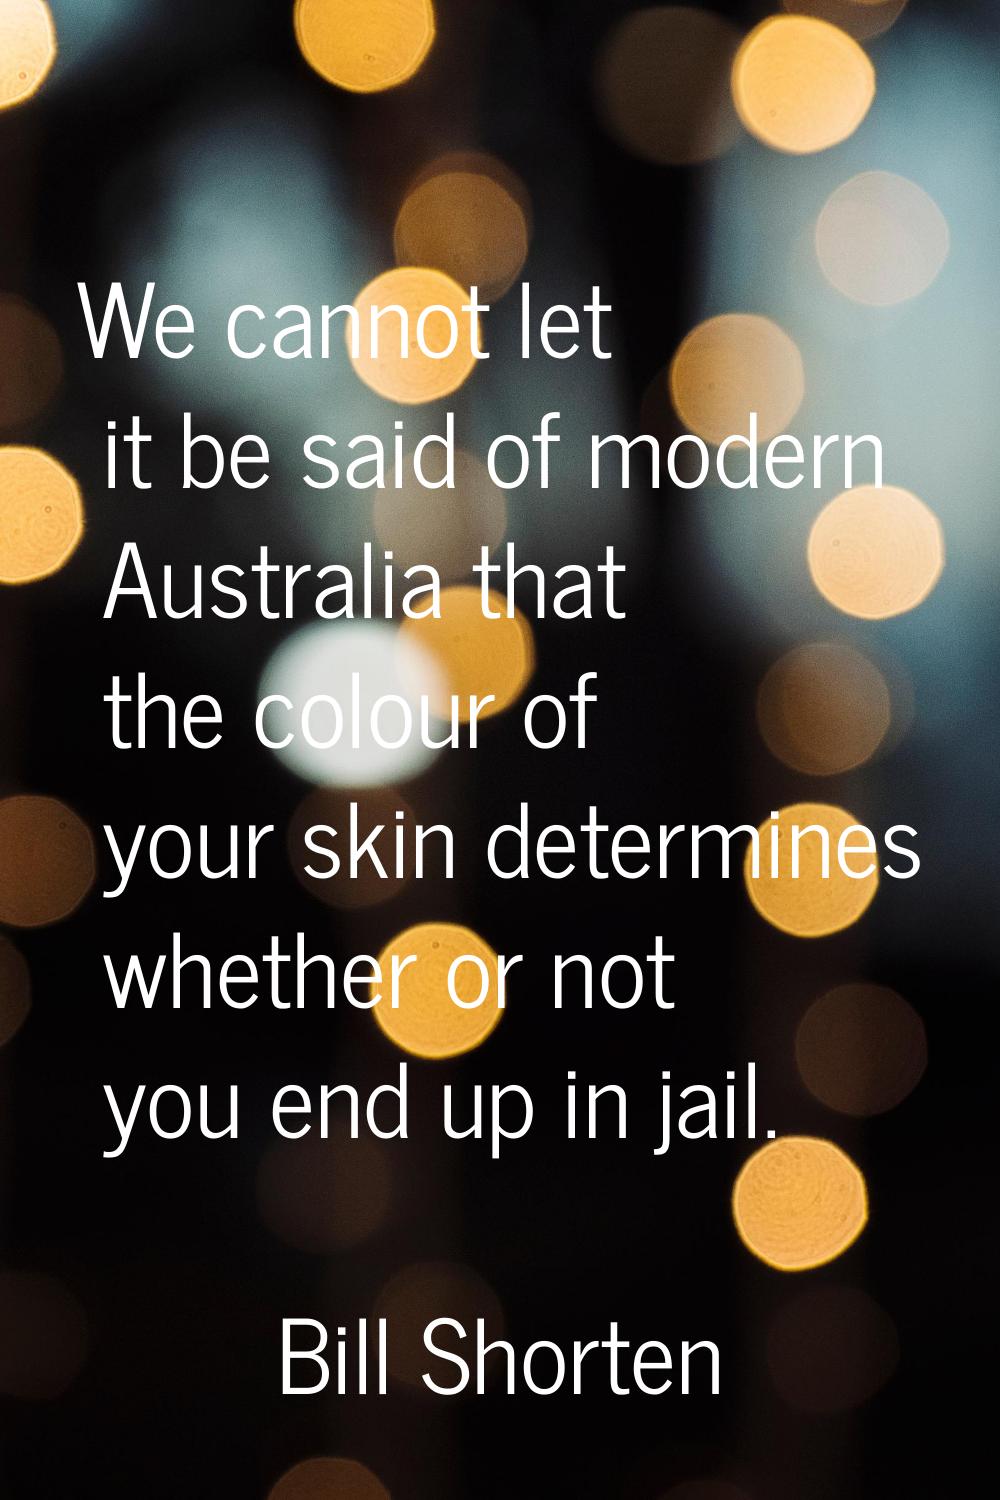 We cannot let it be said of modern Australia that the colour of your skin determines whether or not